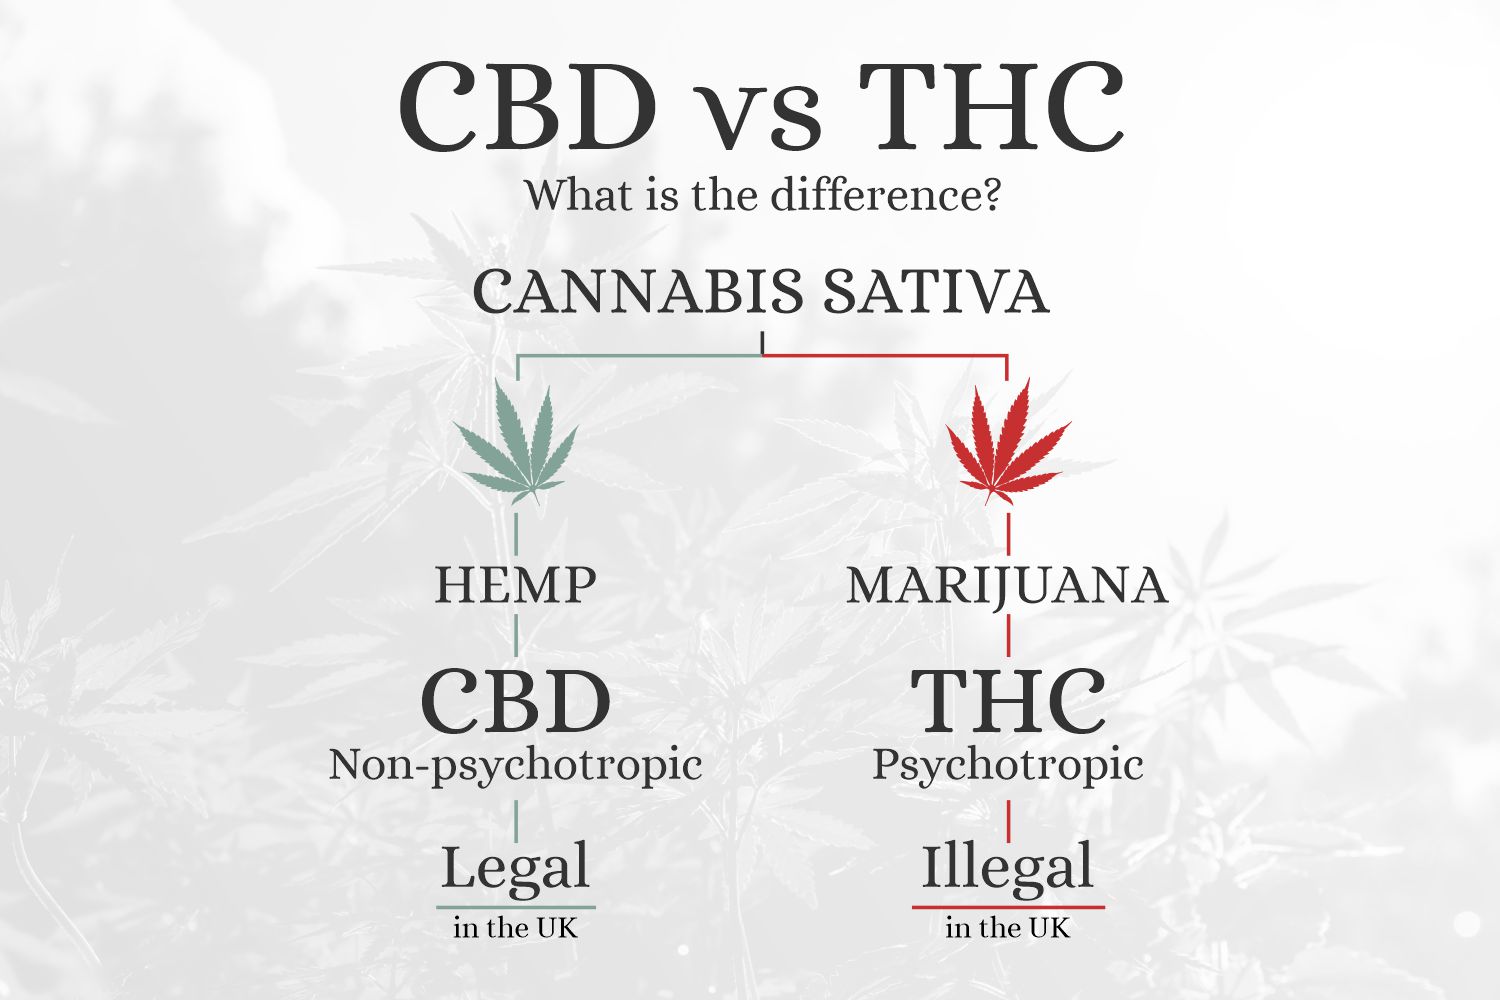 CBD vs THC - What is the difference?